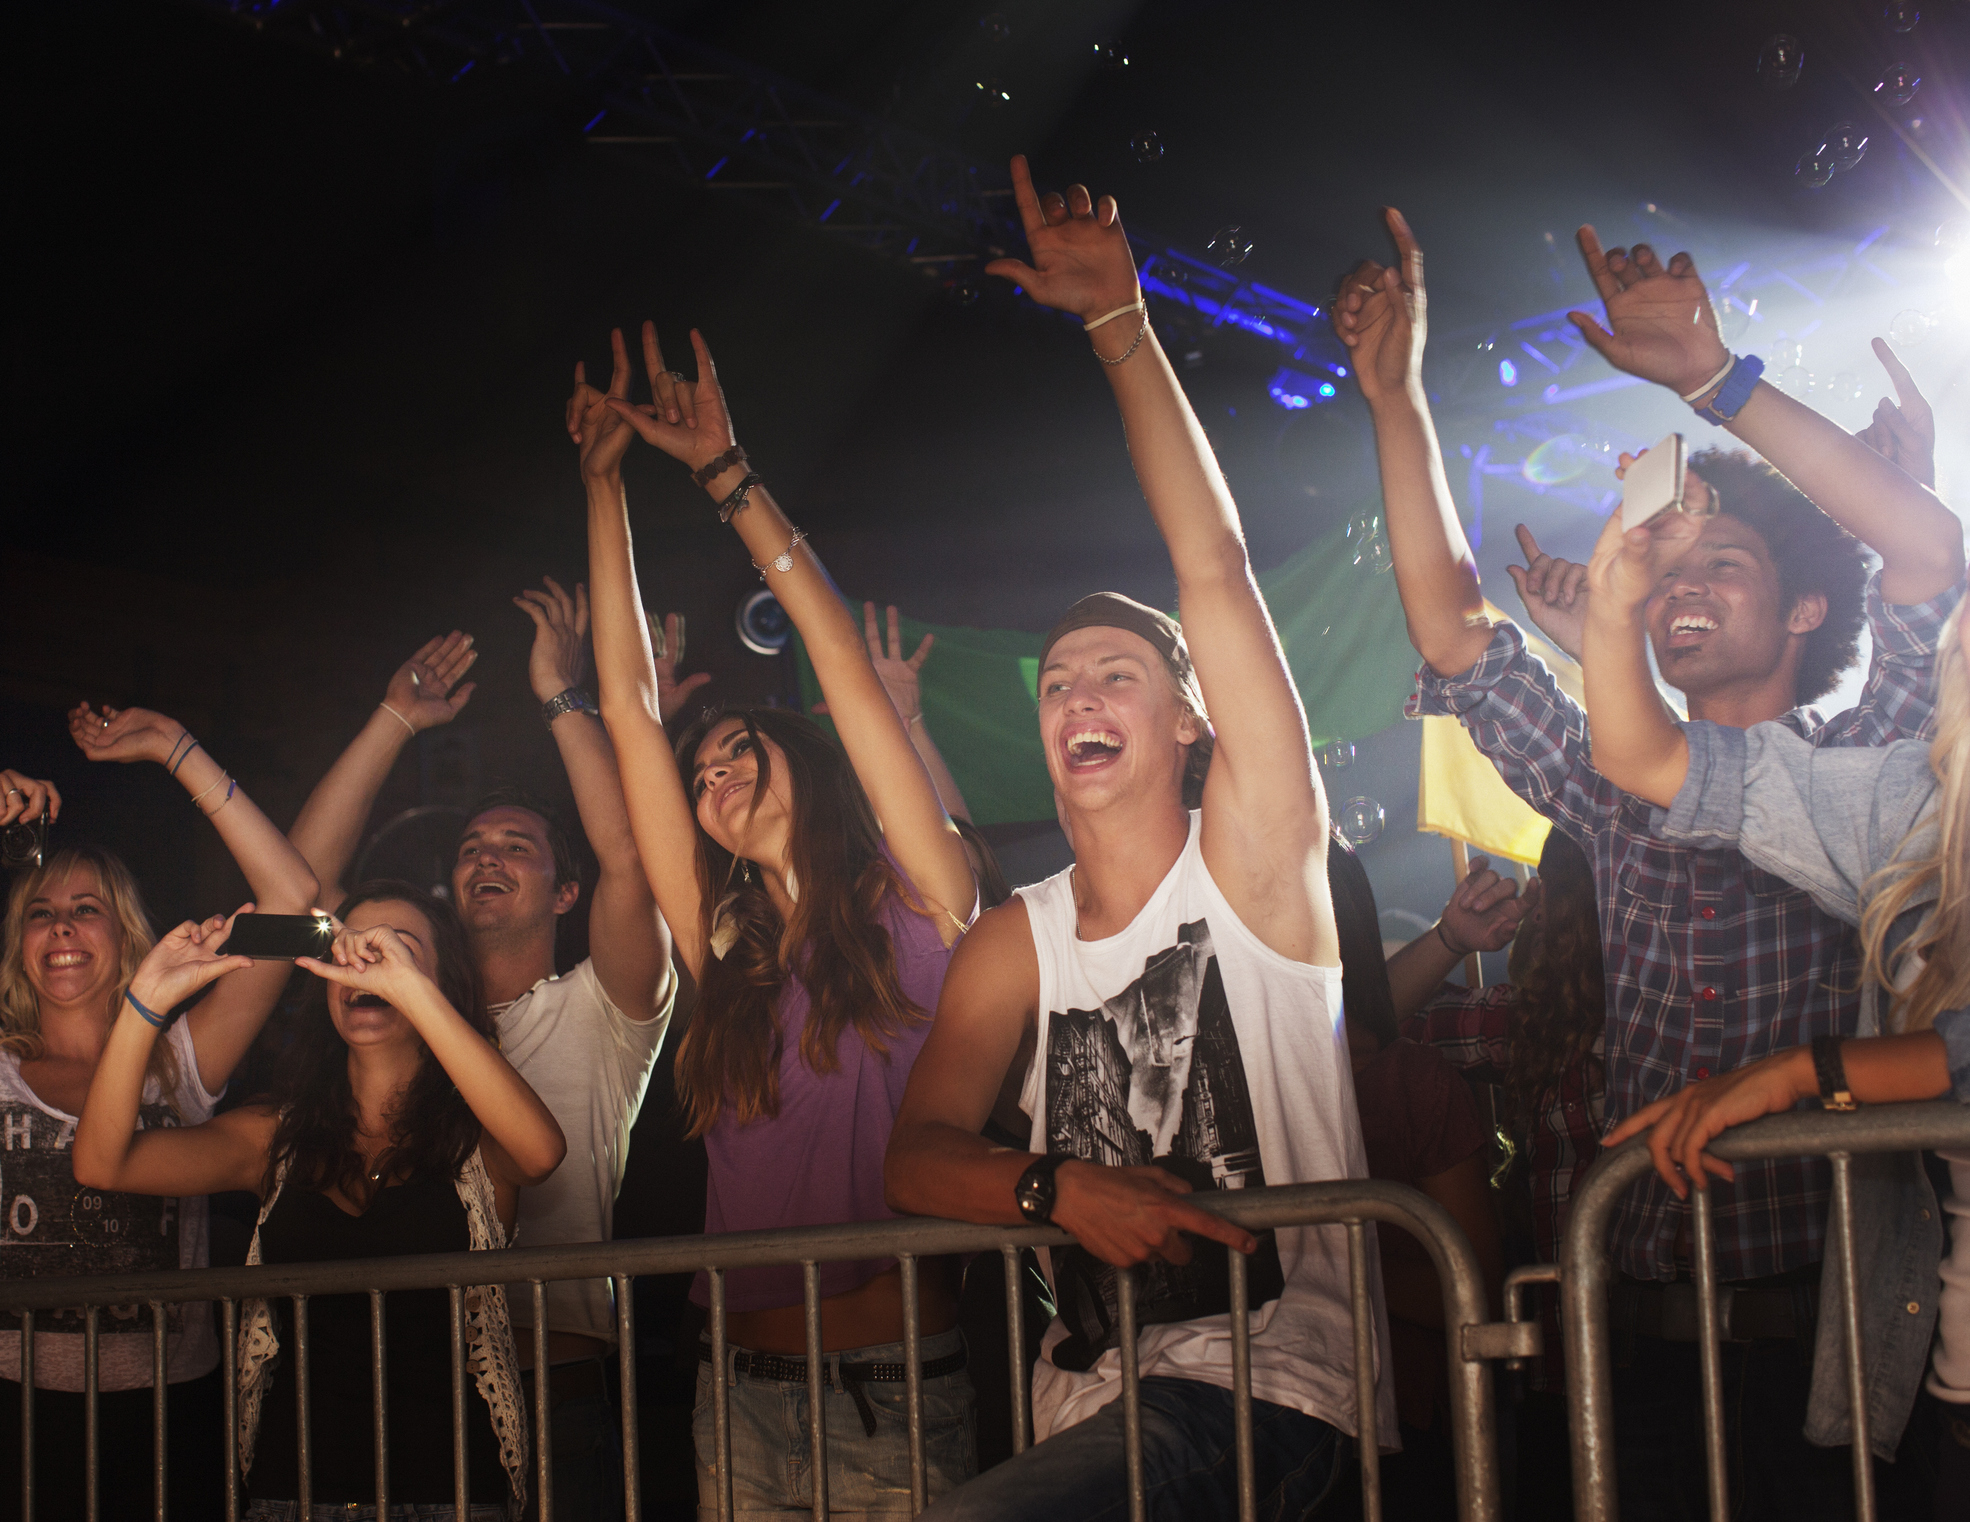 Group of people cheering at a concert, front row, with raised hands, showing excitement and enjoyment